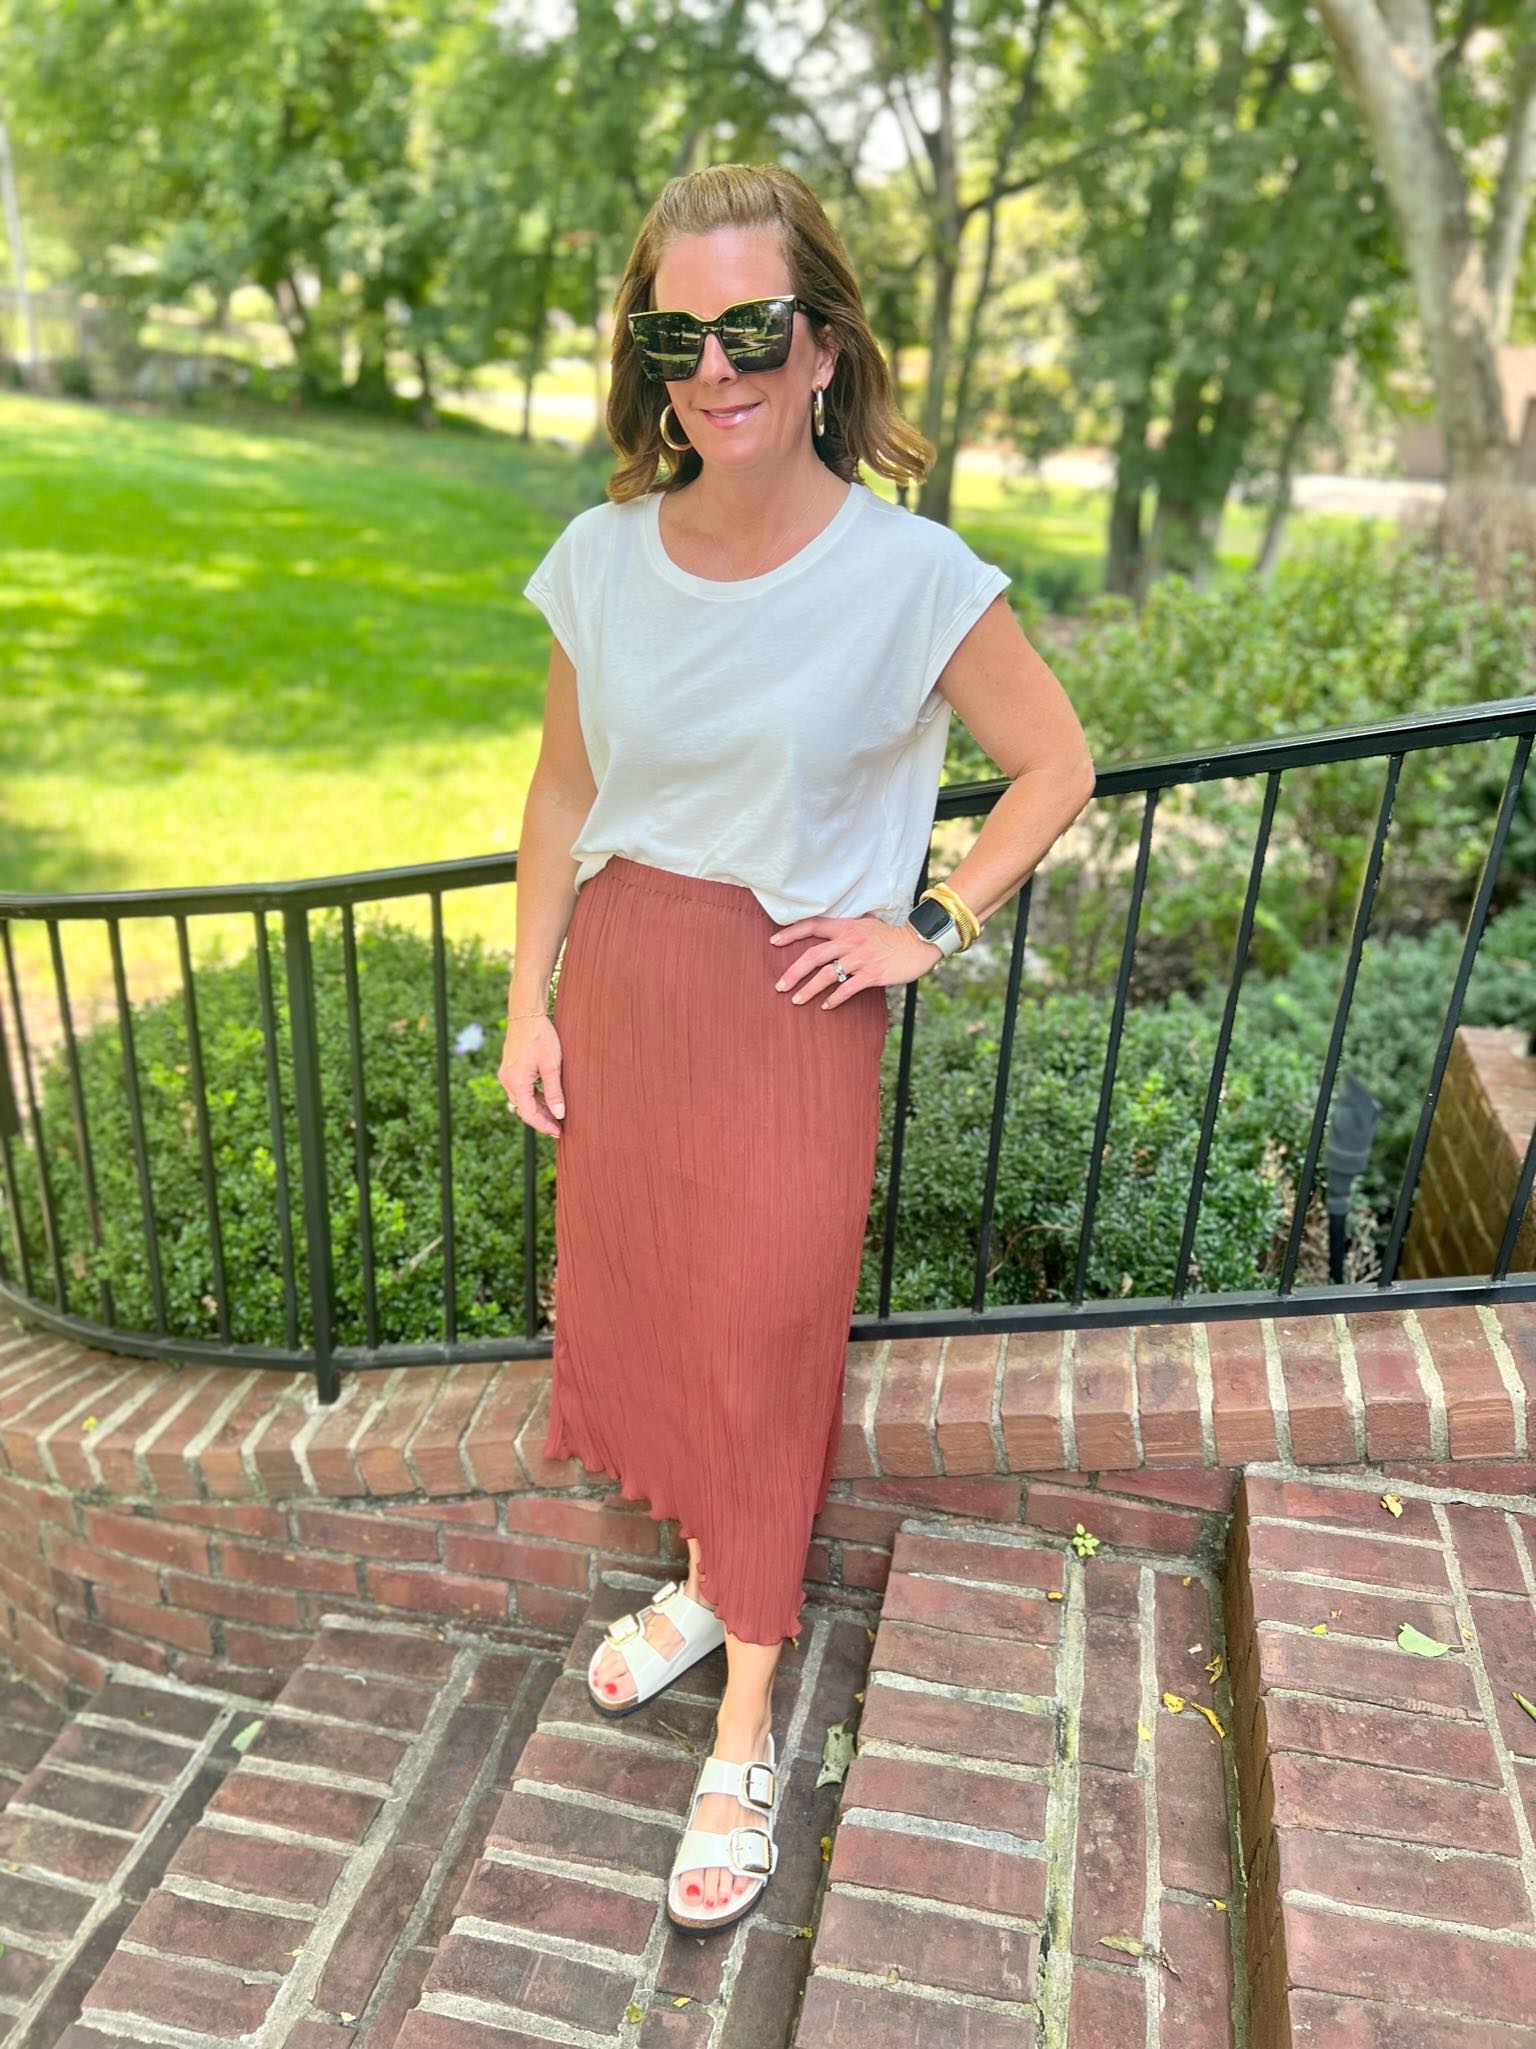 Muscle Tank & Midi Skirt how to style a midi skirt style inspiration Nashville stylists share style inspiration for midi skirts how to wear a midi skirt casually fun casual looks with midi skirt